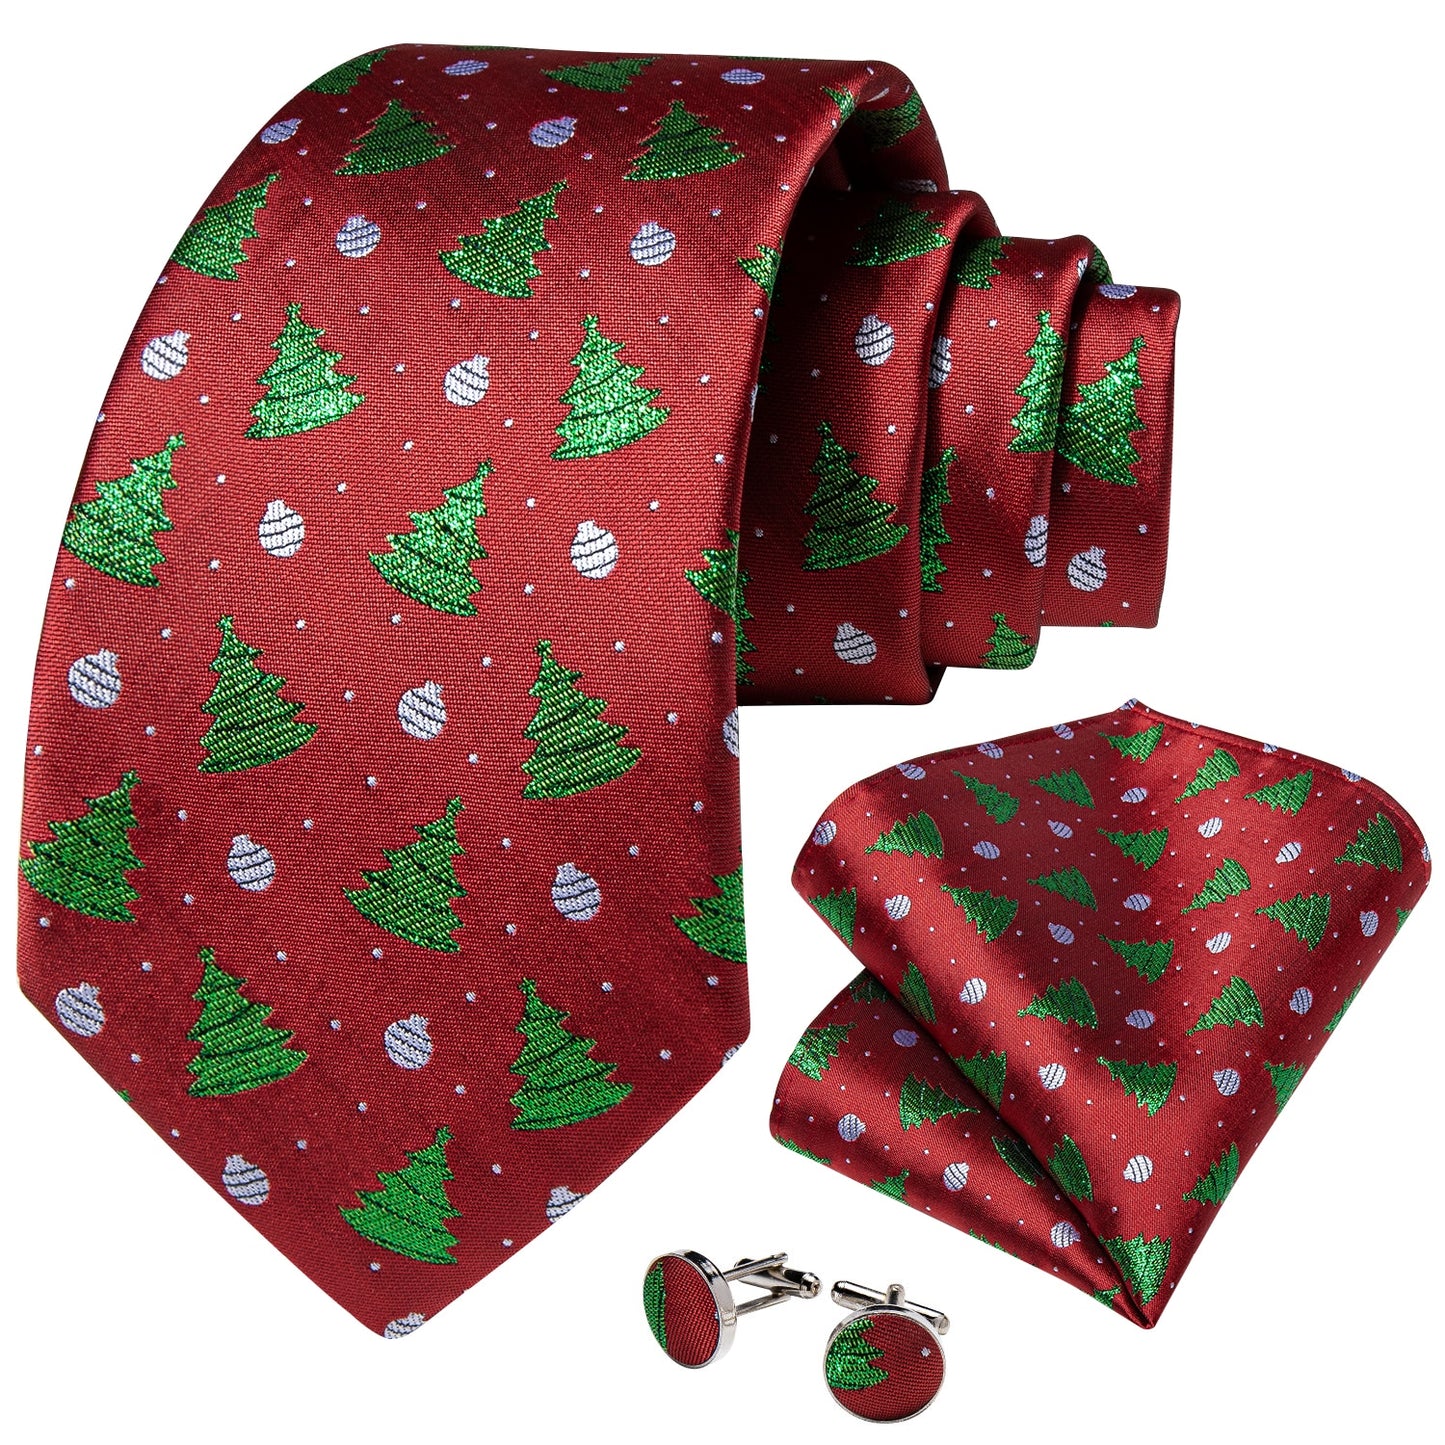 Christmas Tree with Balls In Red Tie Set